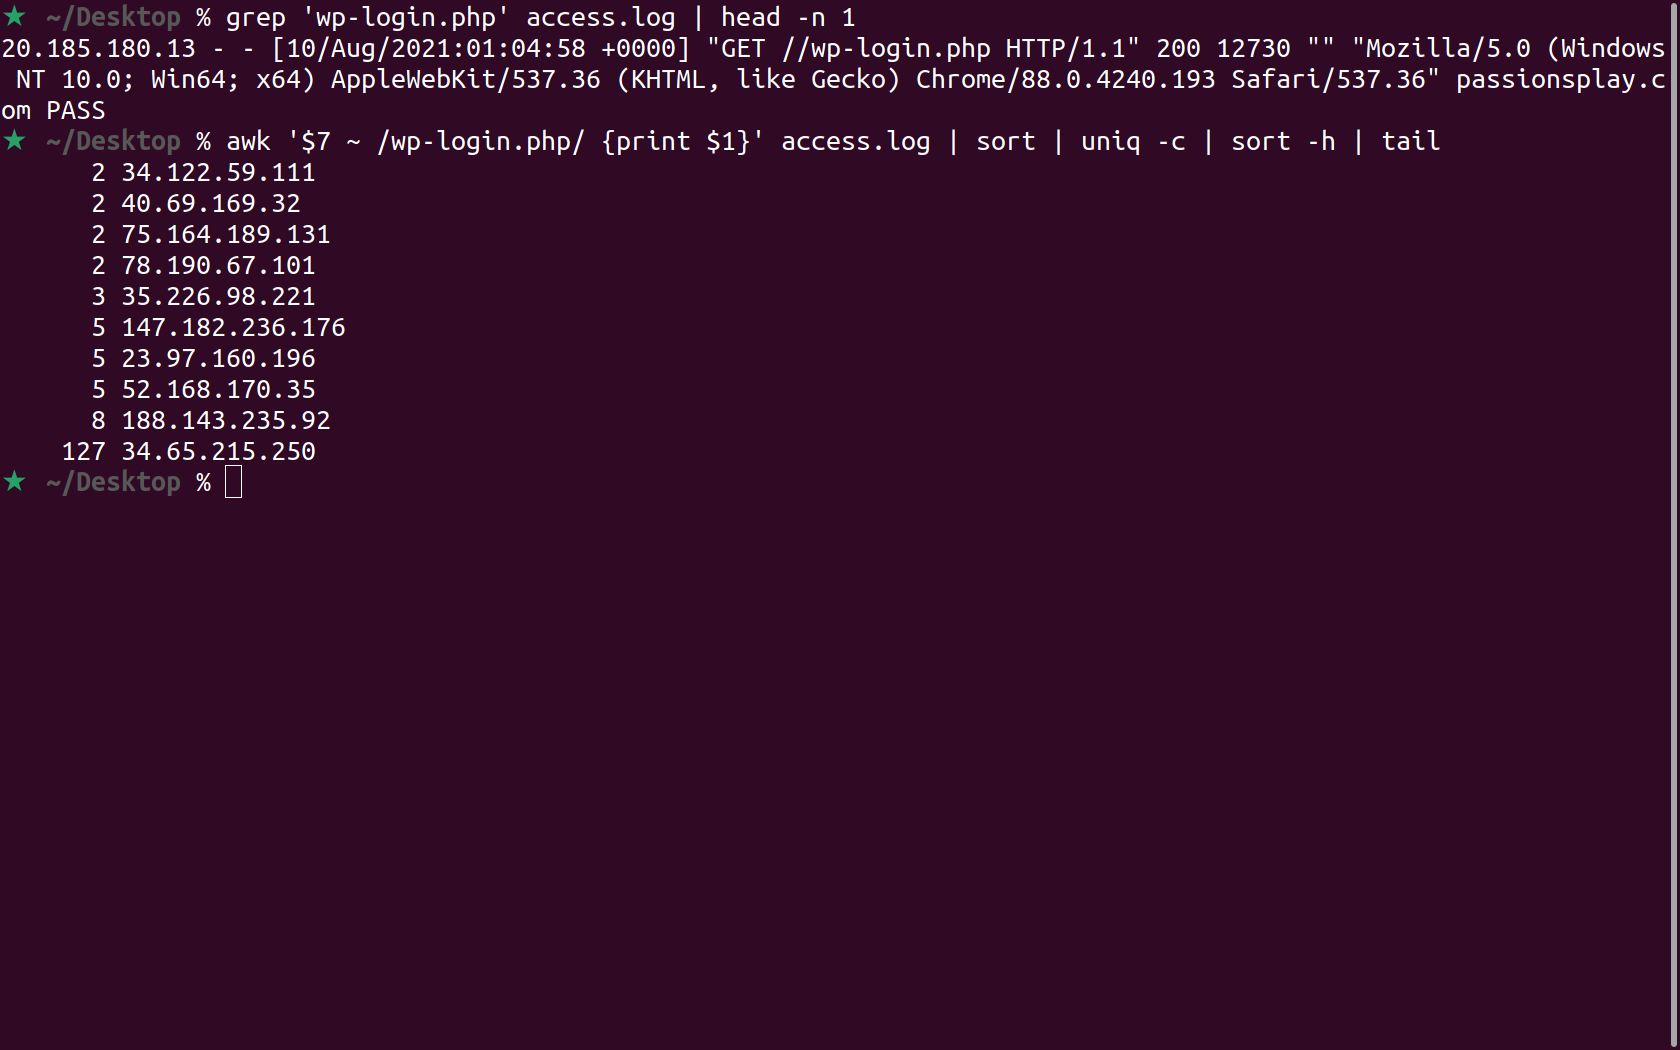 A screenshot of using awk to count the number of requests to the wp-login.php file.